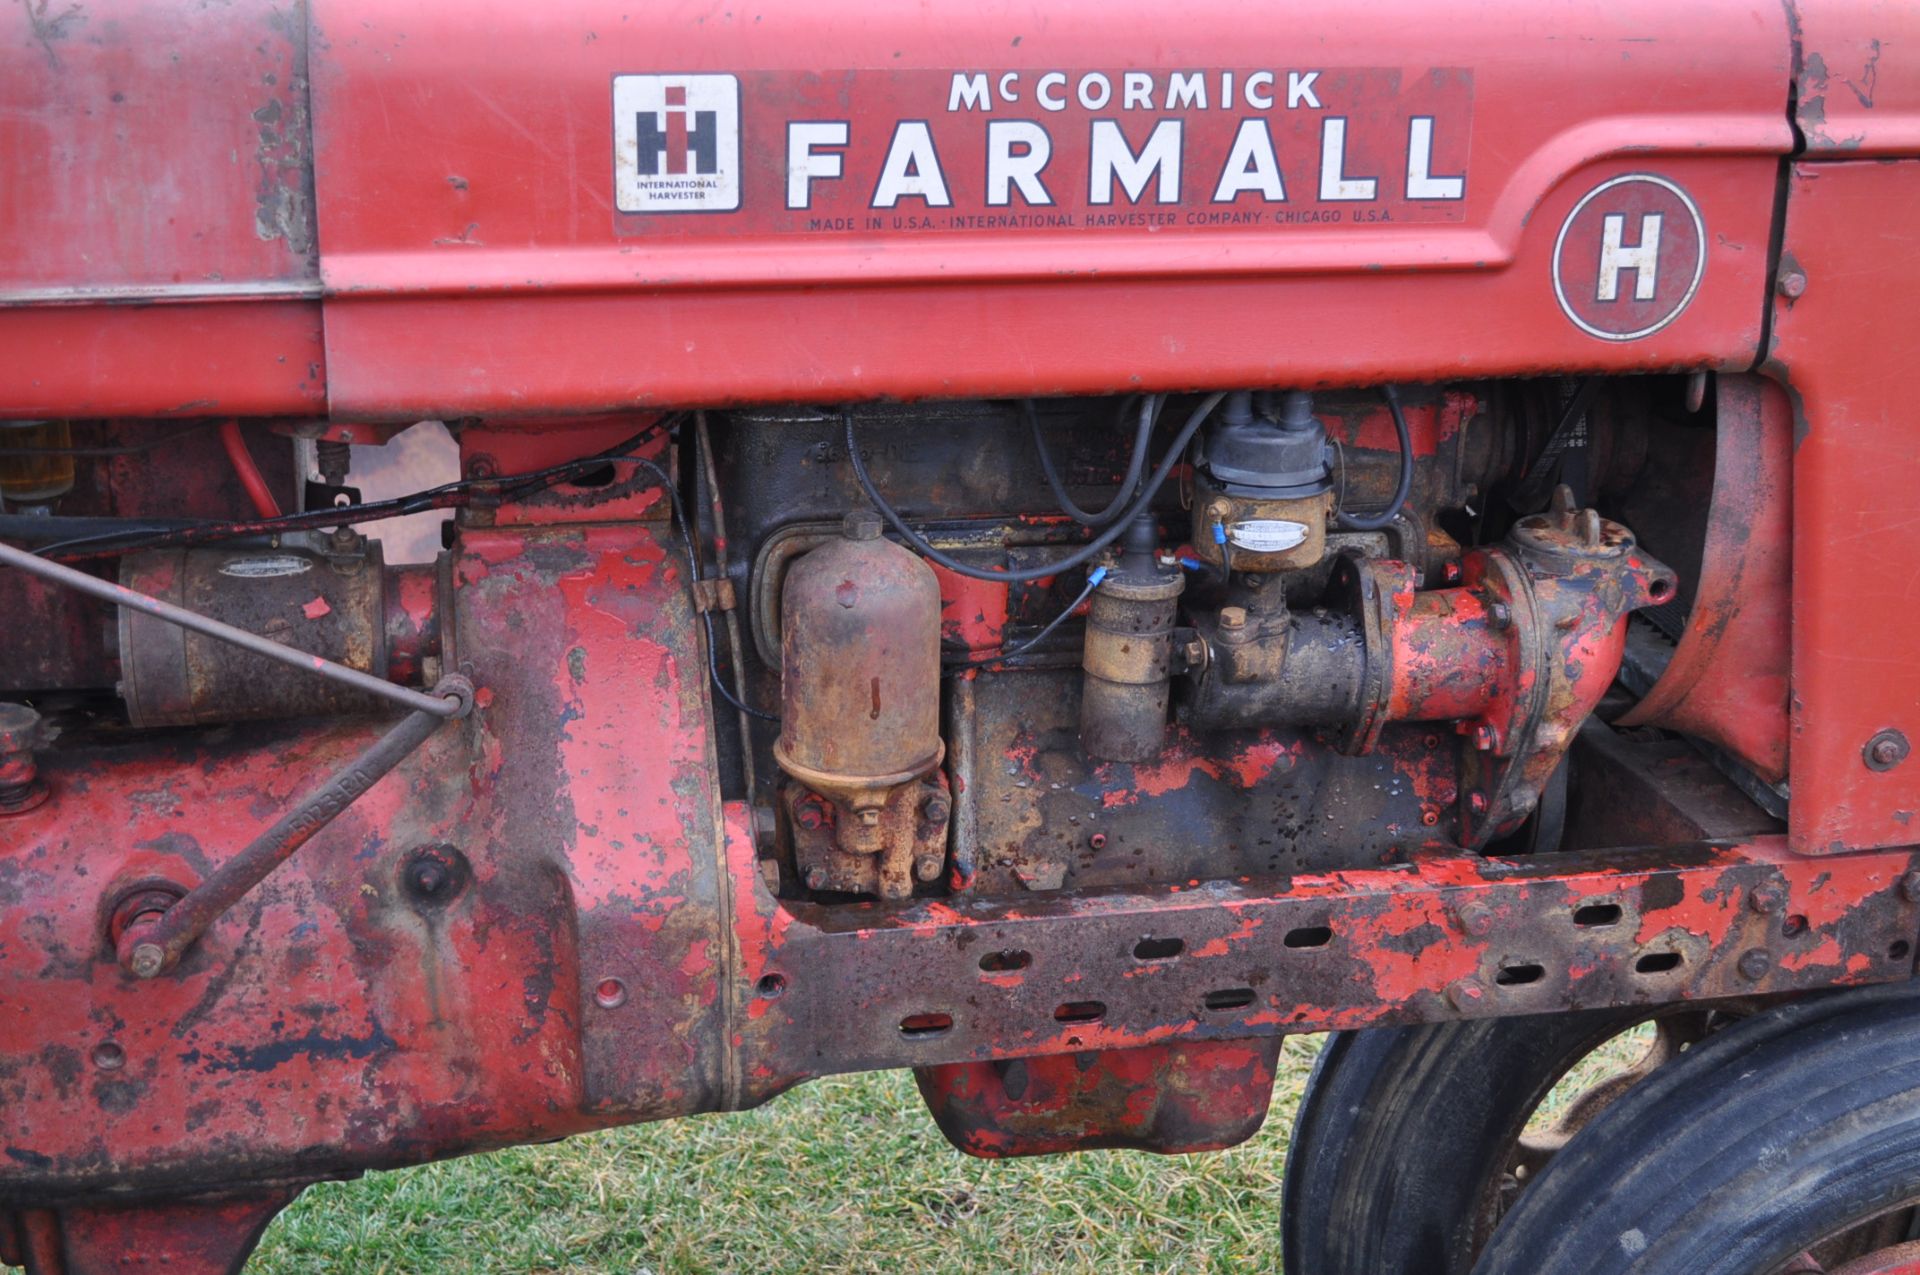 McCormick Farmall H tractor, 12.4-38 rear, narrow front, side pulley, 540 pto, SN FBH273308XL - Image 9 of 14